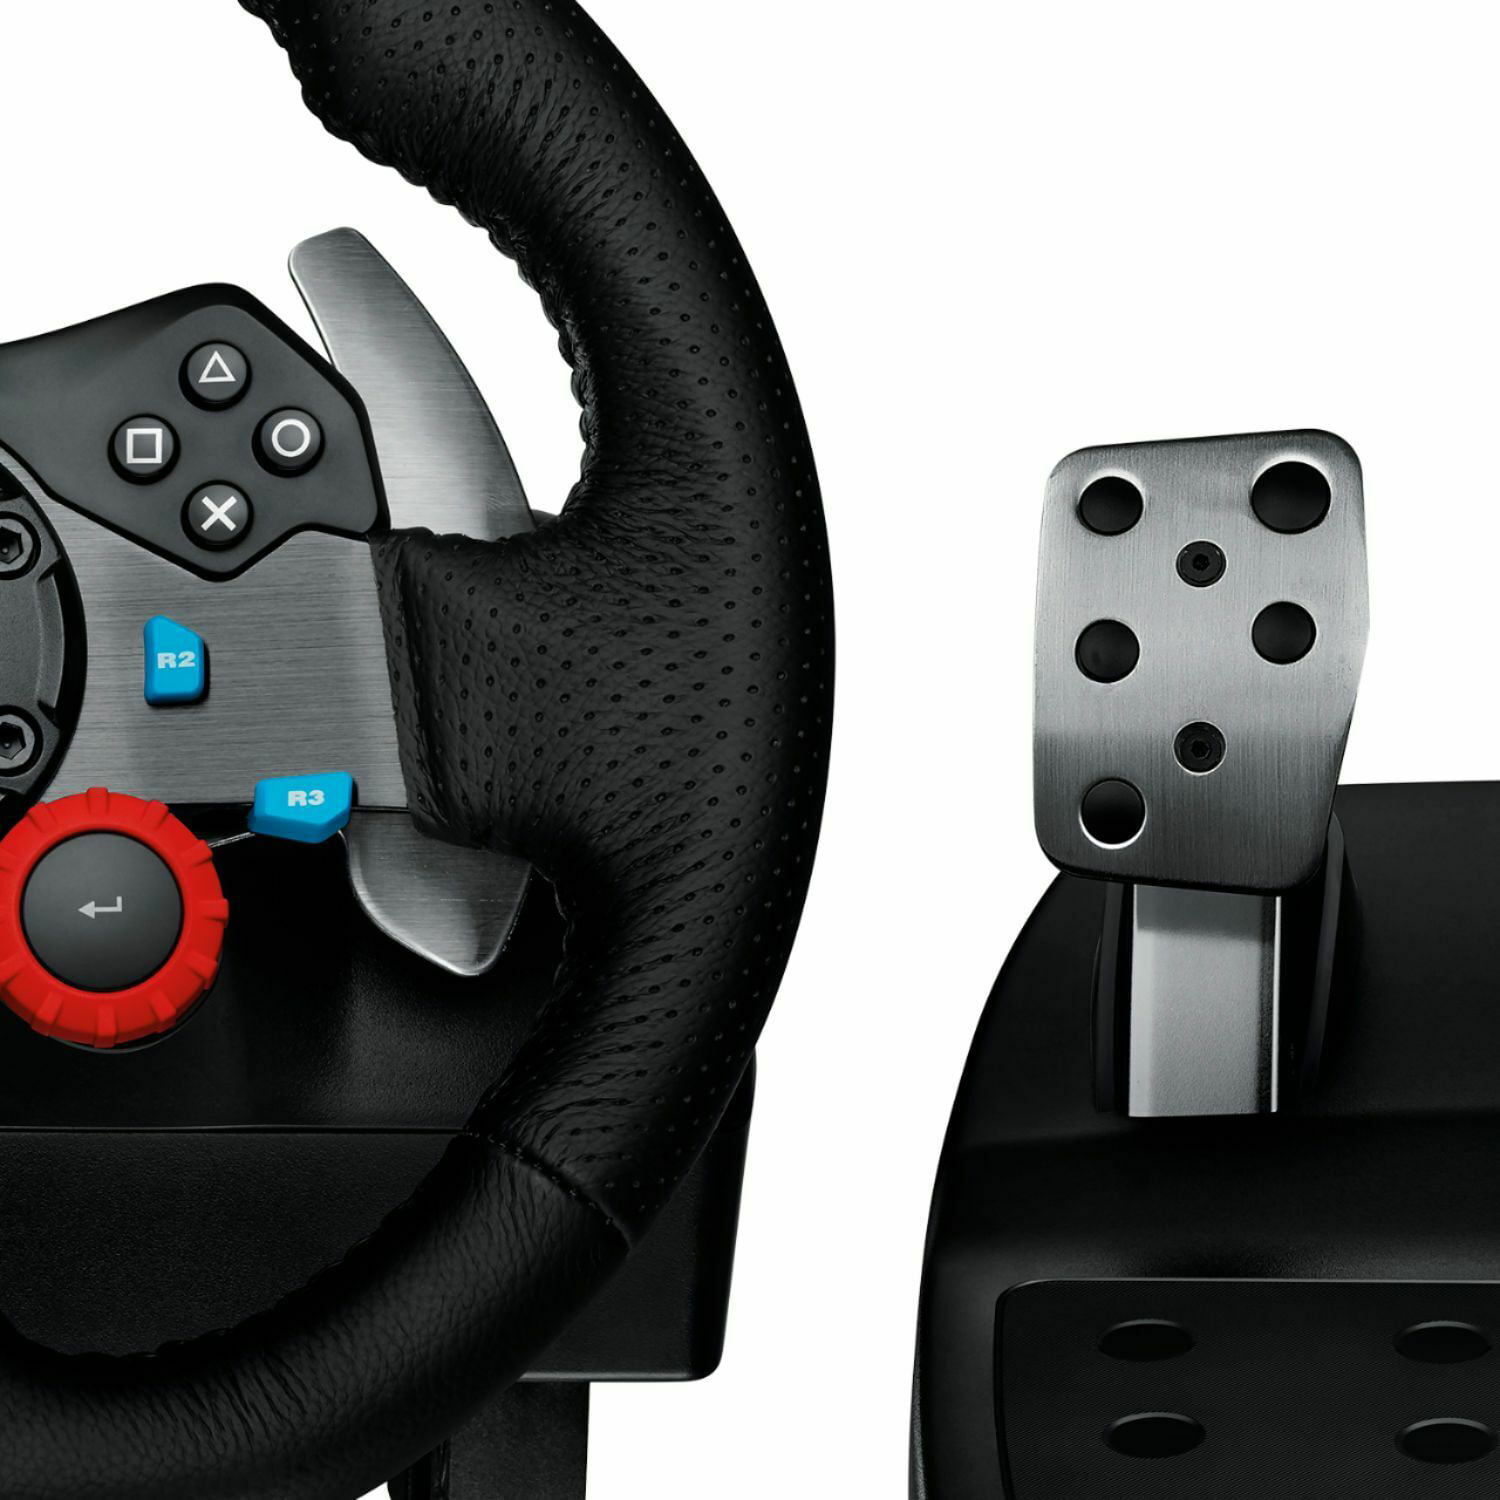 Logitech G29 Driving Force Racing Wheel with Pedals for